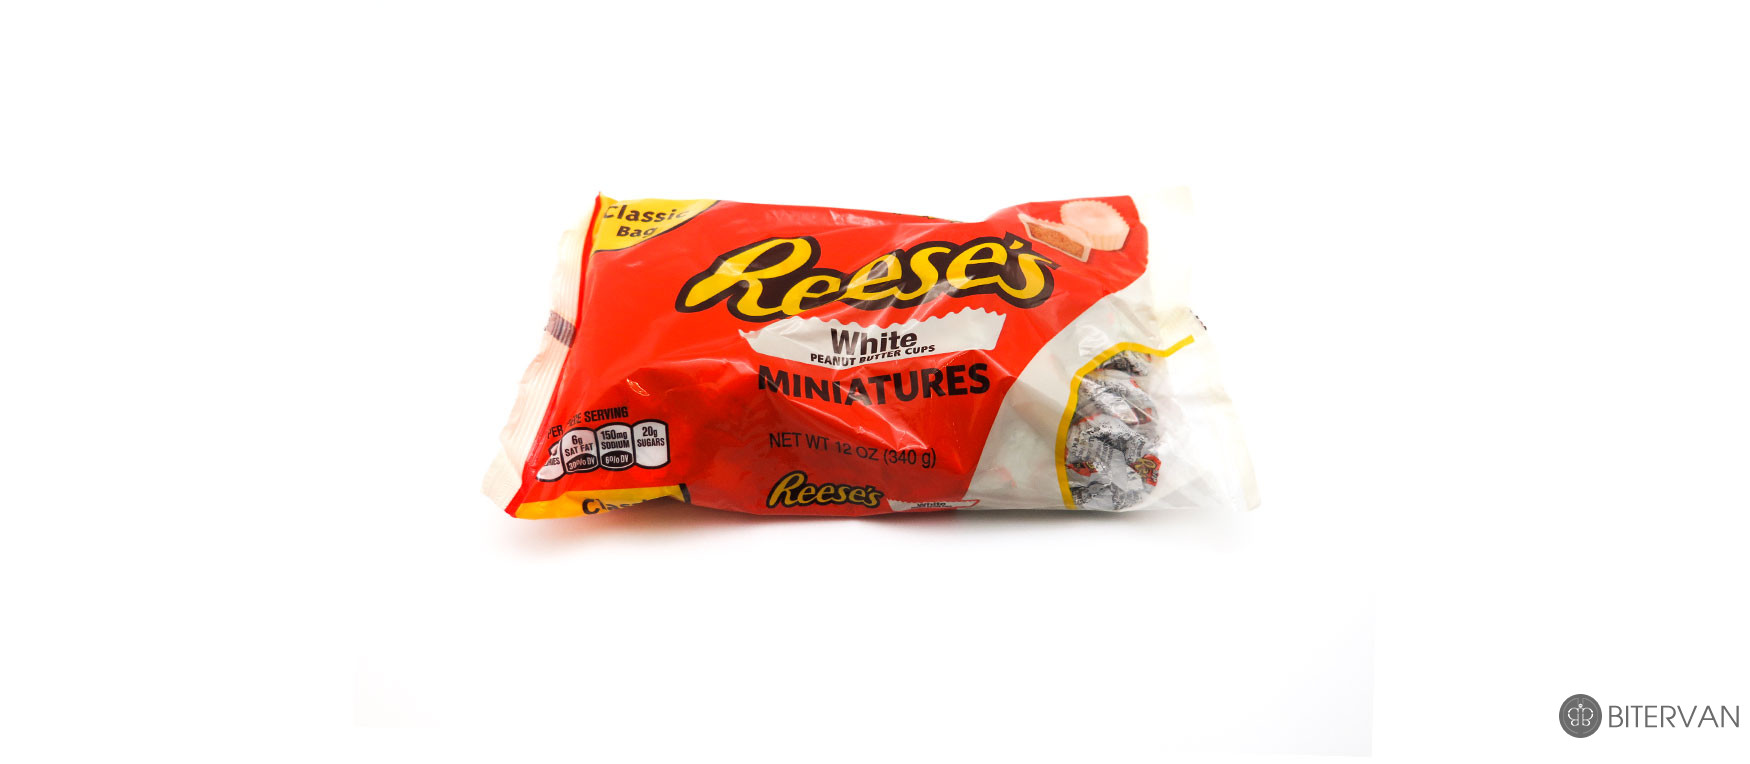 Reese's White Peanut Butter Cups Miniatures- 340 gr